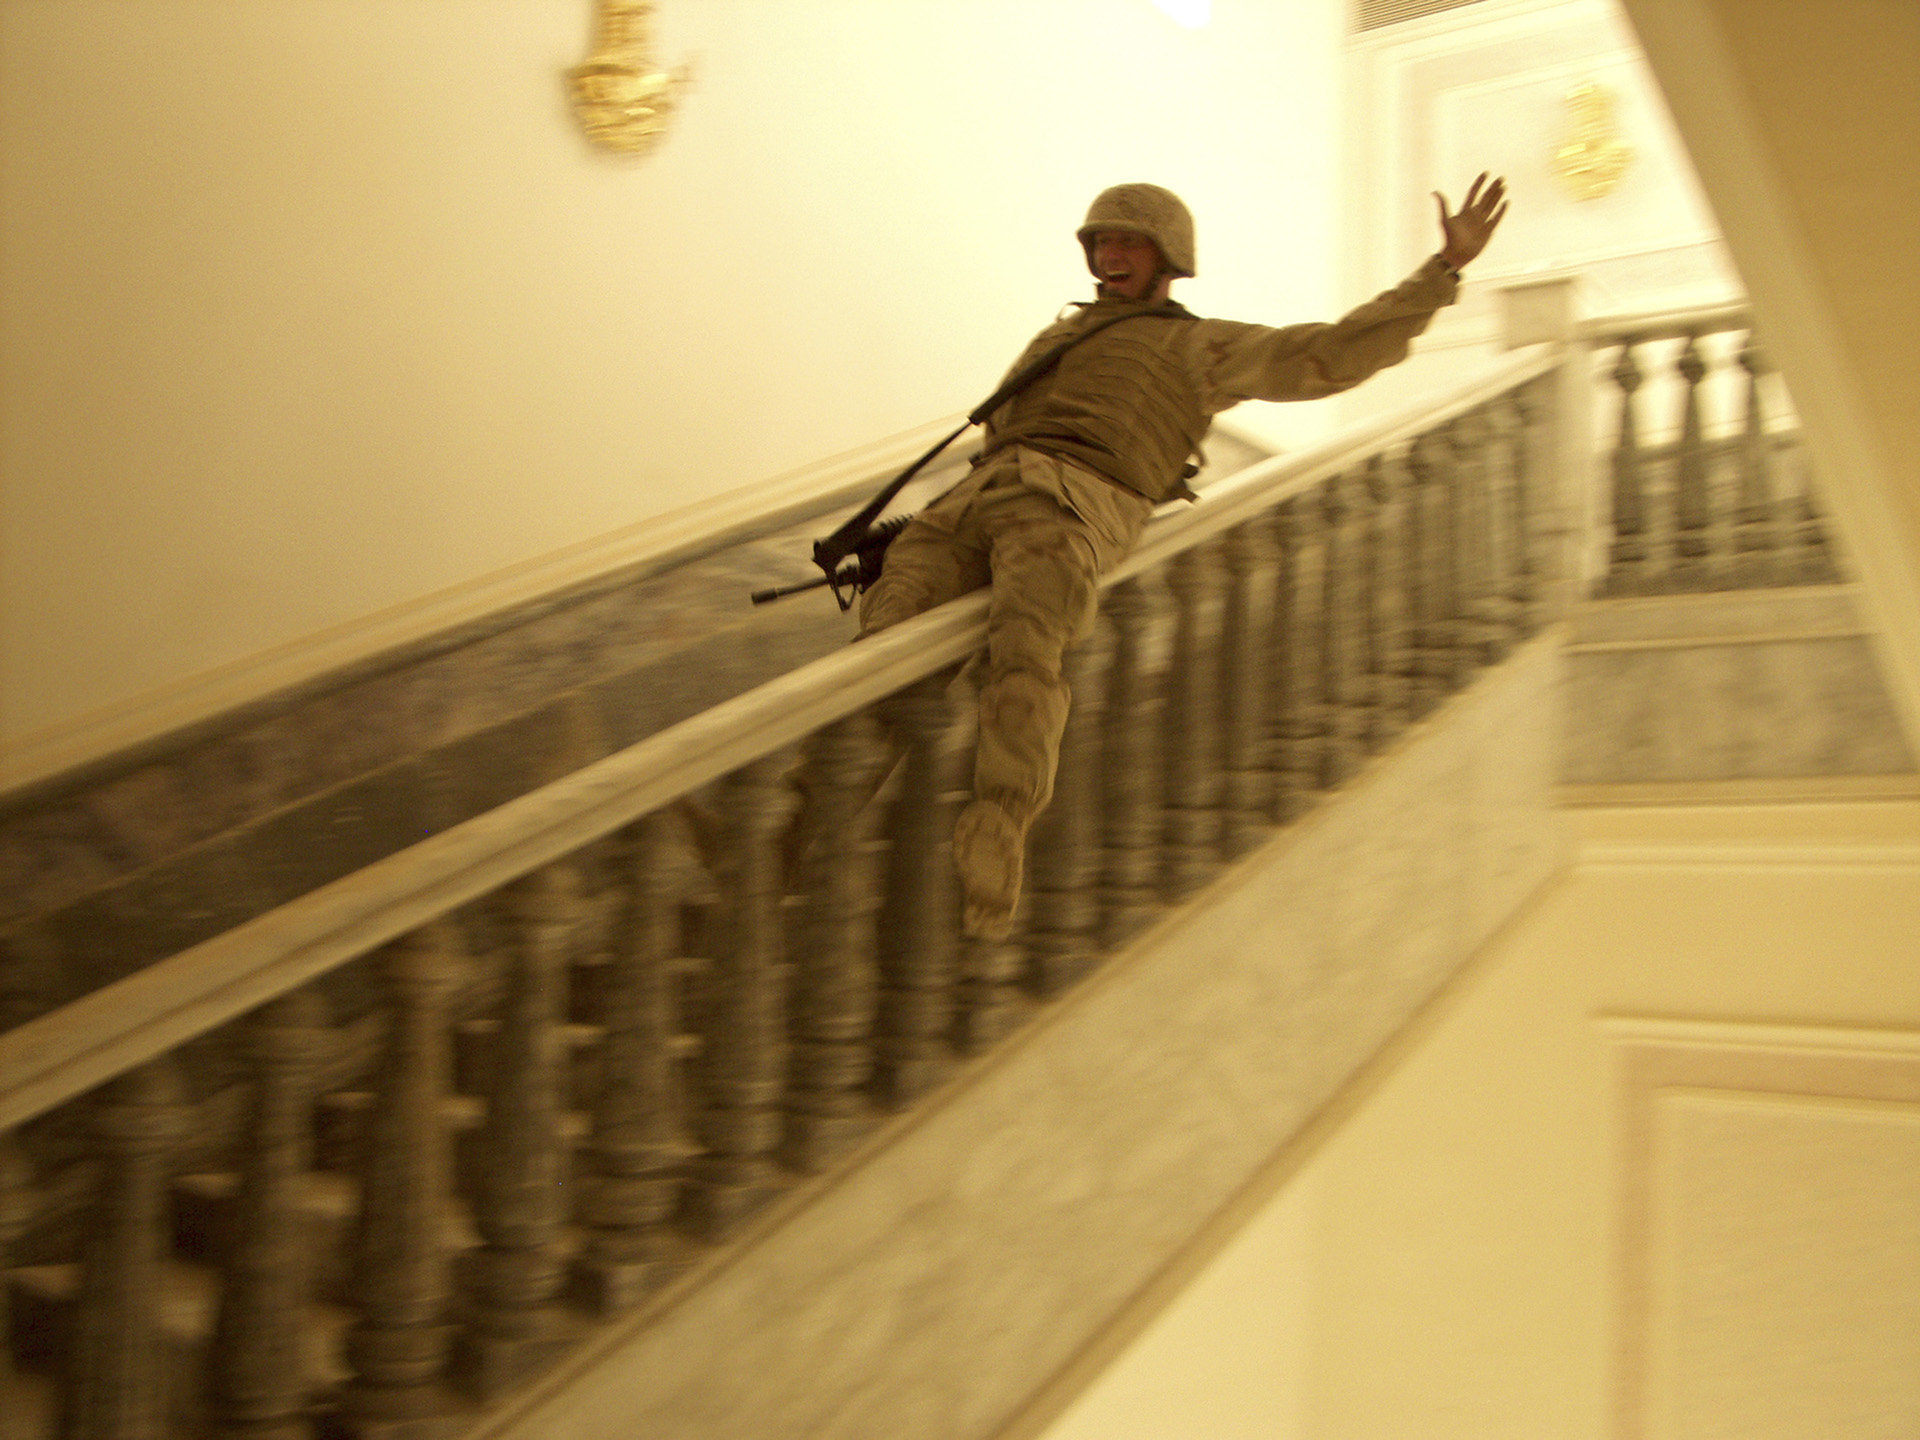 A U.S. Marine slides down the marble handrail in Saddam Hussein's extravagant palace built in his hometown of Tikrit. The enormous Palace contained rugs and antiquities worth hundreds of thousands of dollars before being looted by Iraqis and U.S. soldiers. Tikrit, Iraq, 2003. Photo by Ashley Gilbertson/VII